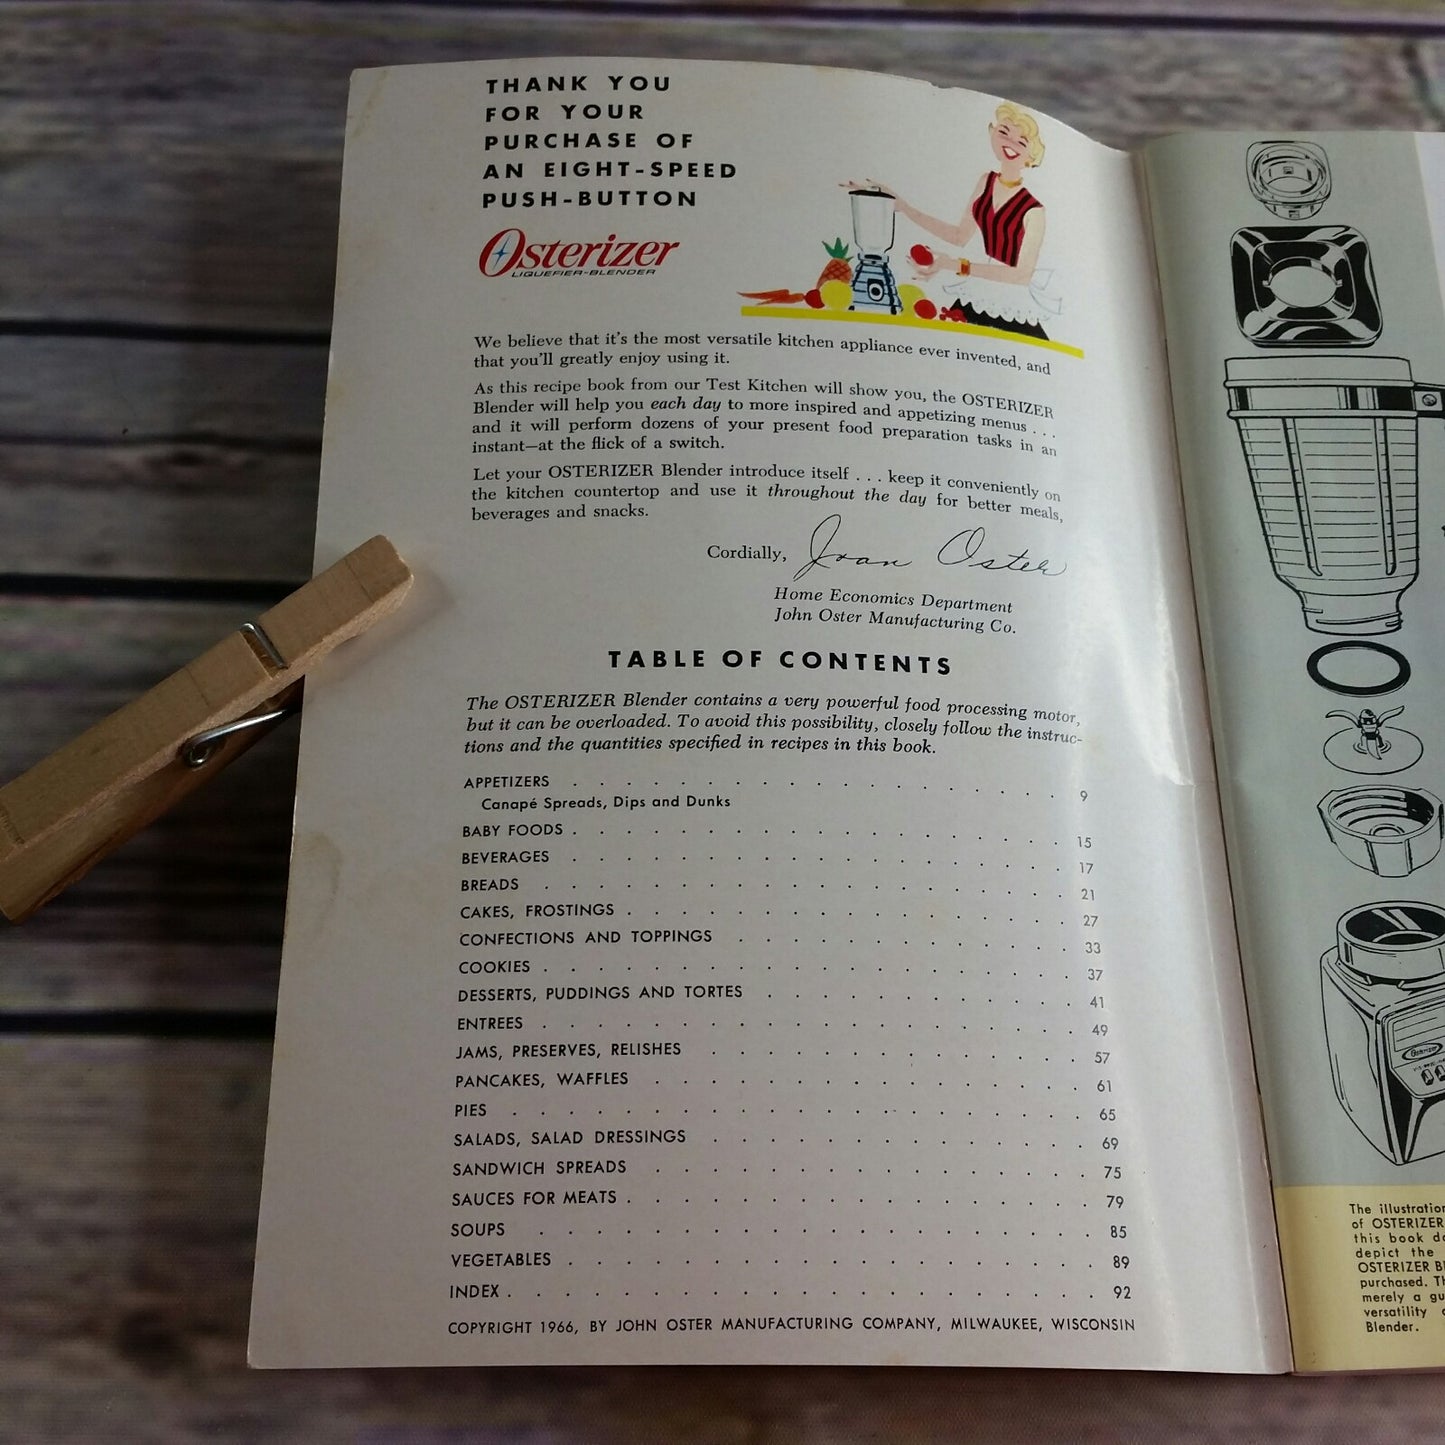 Spin Cookery Blender Cook Book 8 speed Push Button Pulse Matic Osterizer 1966 Paperback Booklet Pamphlet Tips